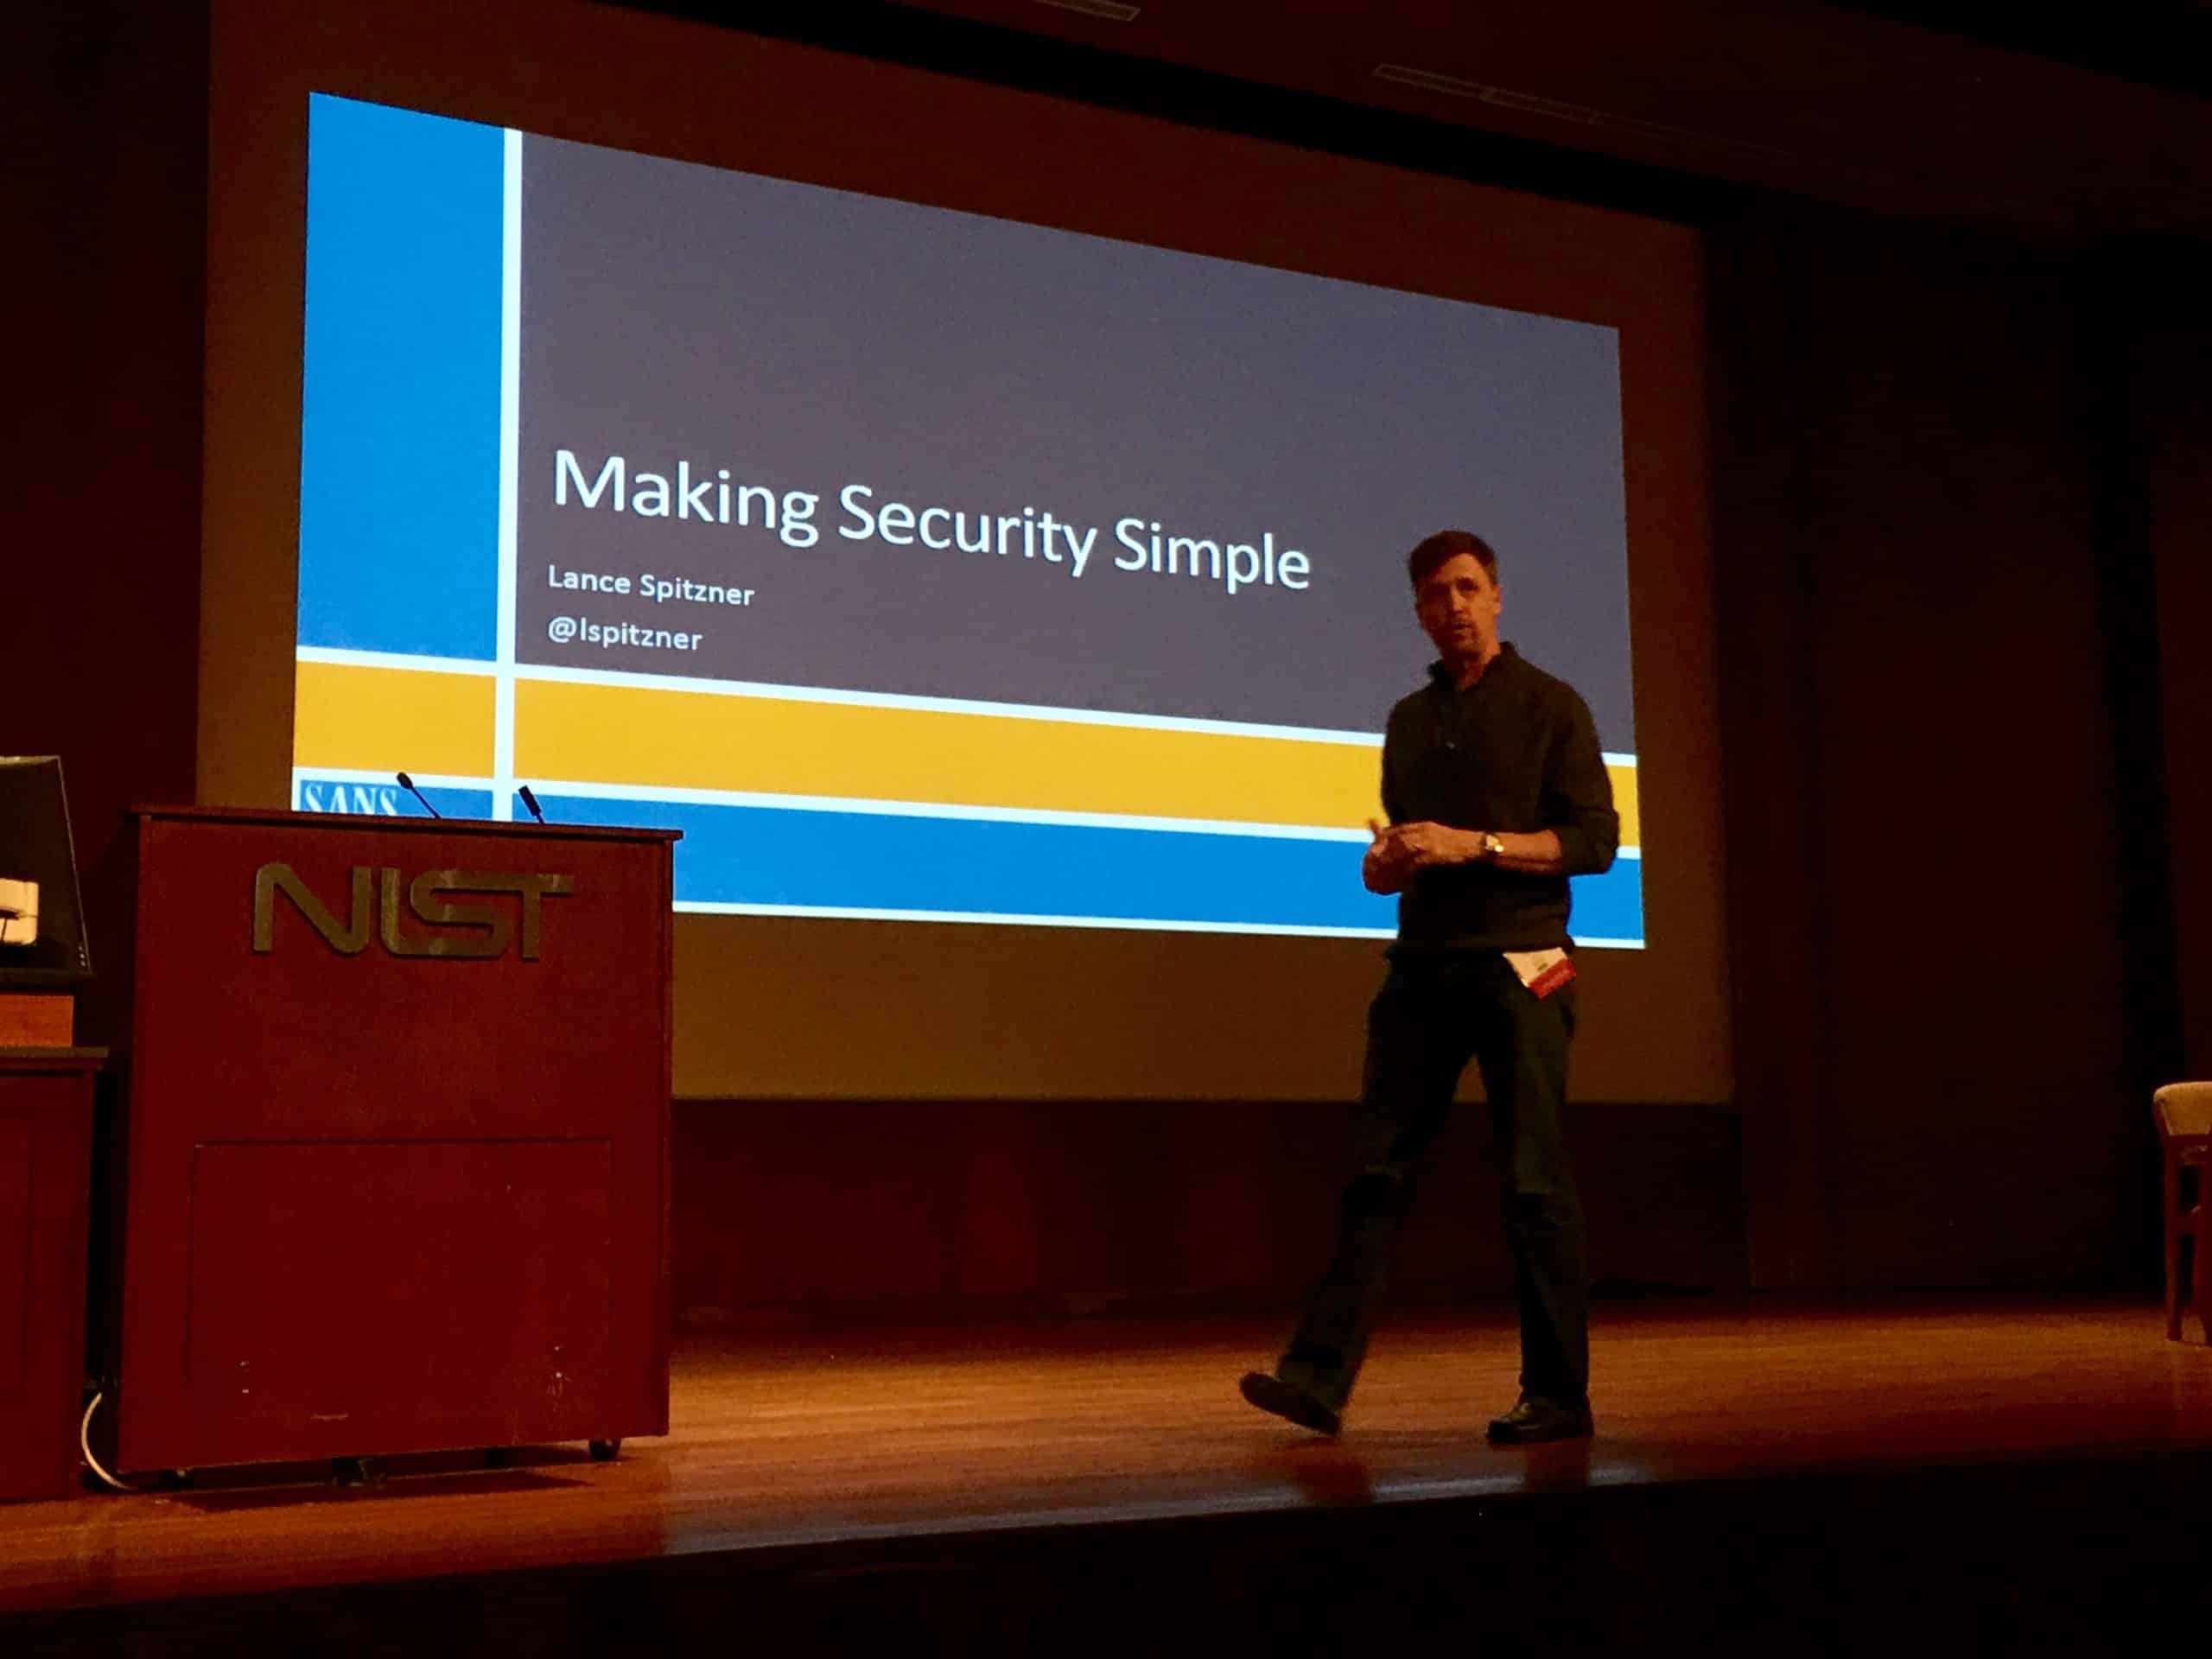 Lance Spitzner: Making security simple - FISSEA NIST Conference